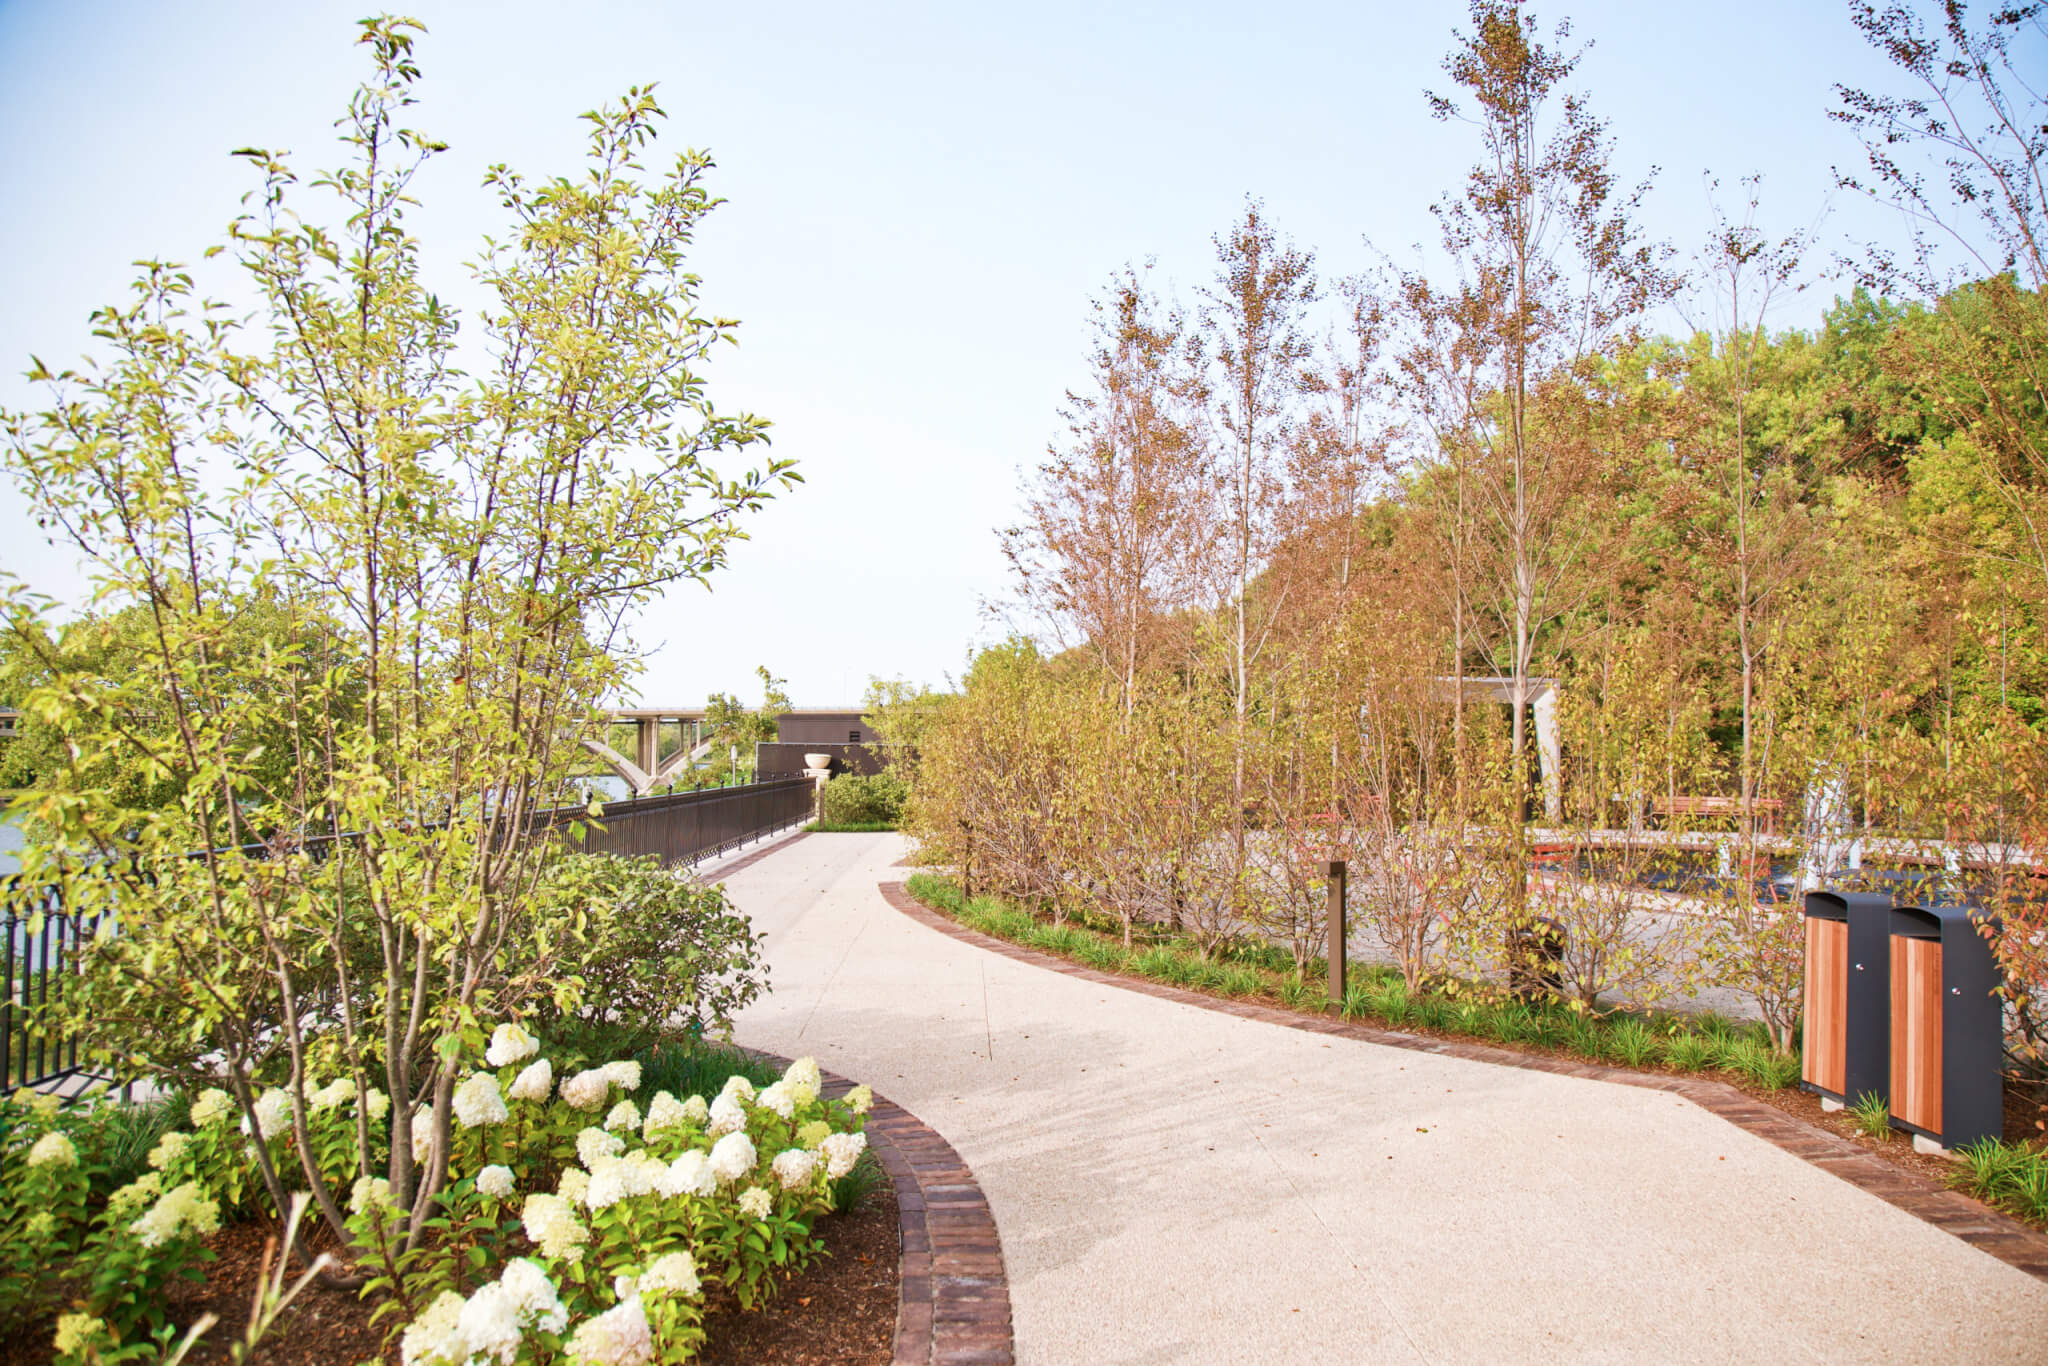 The path along the perimeter of the Ruan Reflection Garden boasts Des Moines River views and thoughtful plantings.